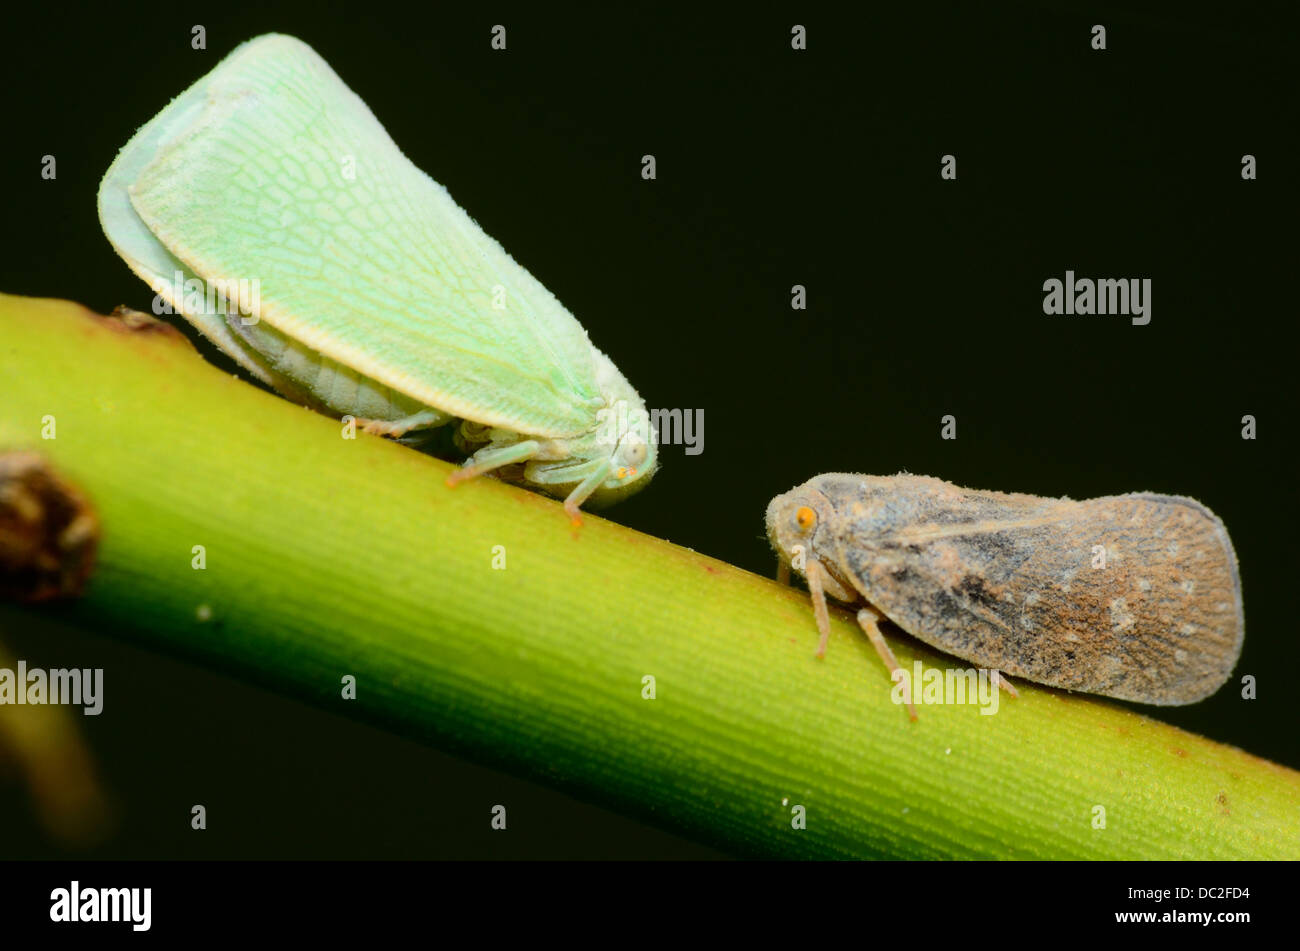 Macro shot of two Leafhoppers insect perched on a green plant stem. Stock Photo